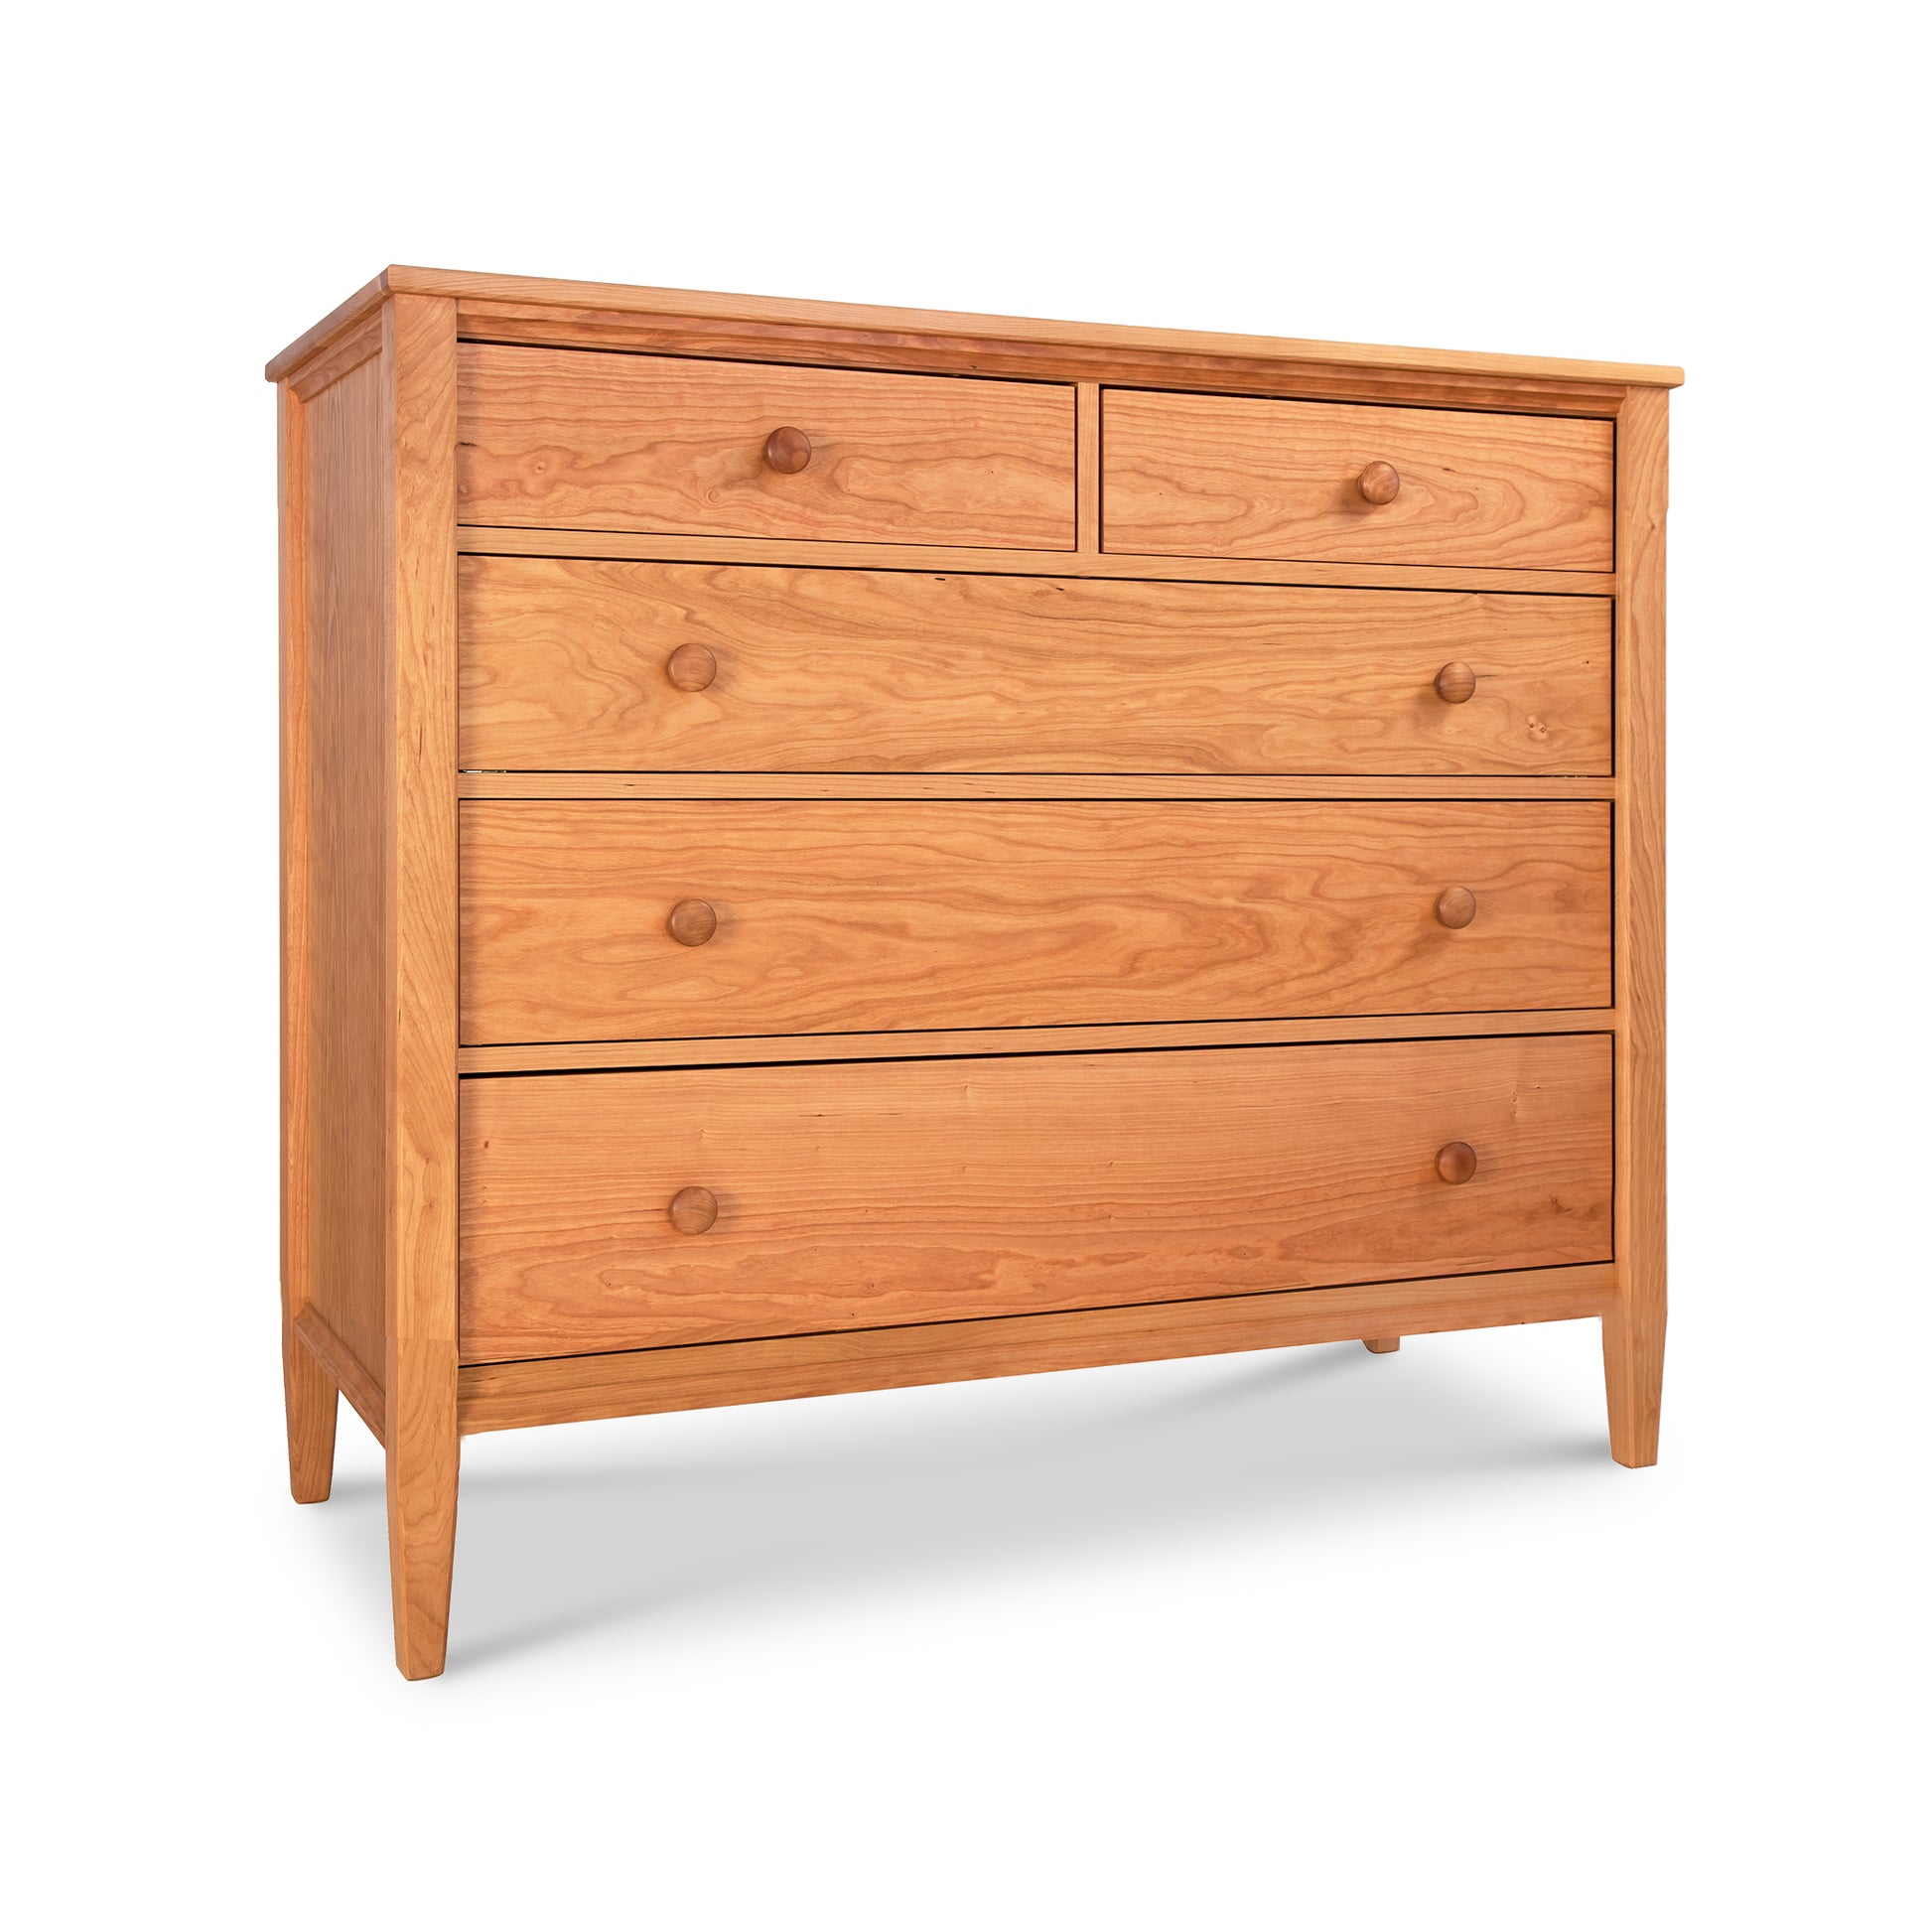 A Maple Corner Woodworks Vermont Shaker Extra Wide Chest made of natural hardwood in a bedroom setting.